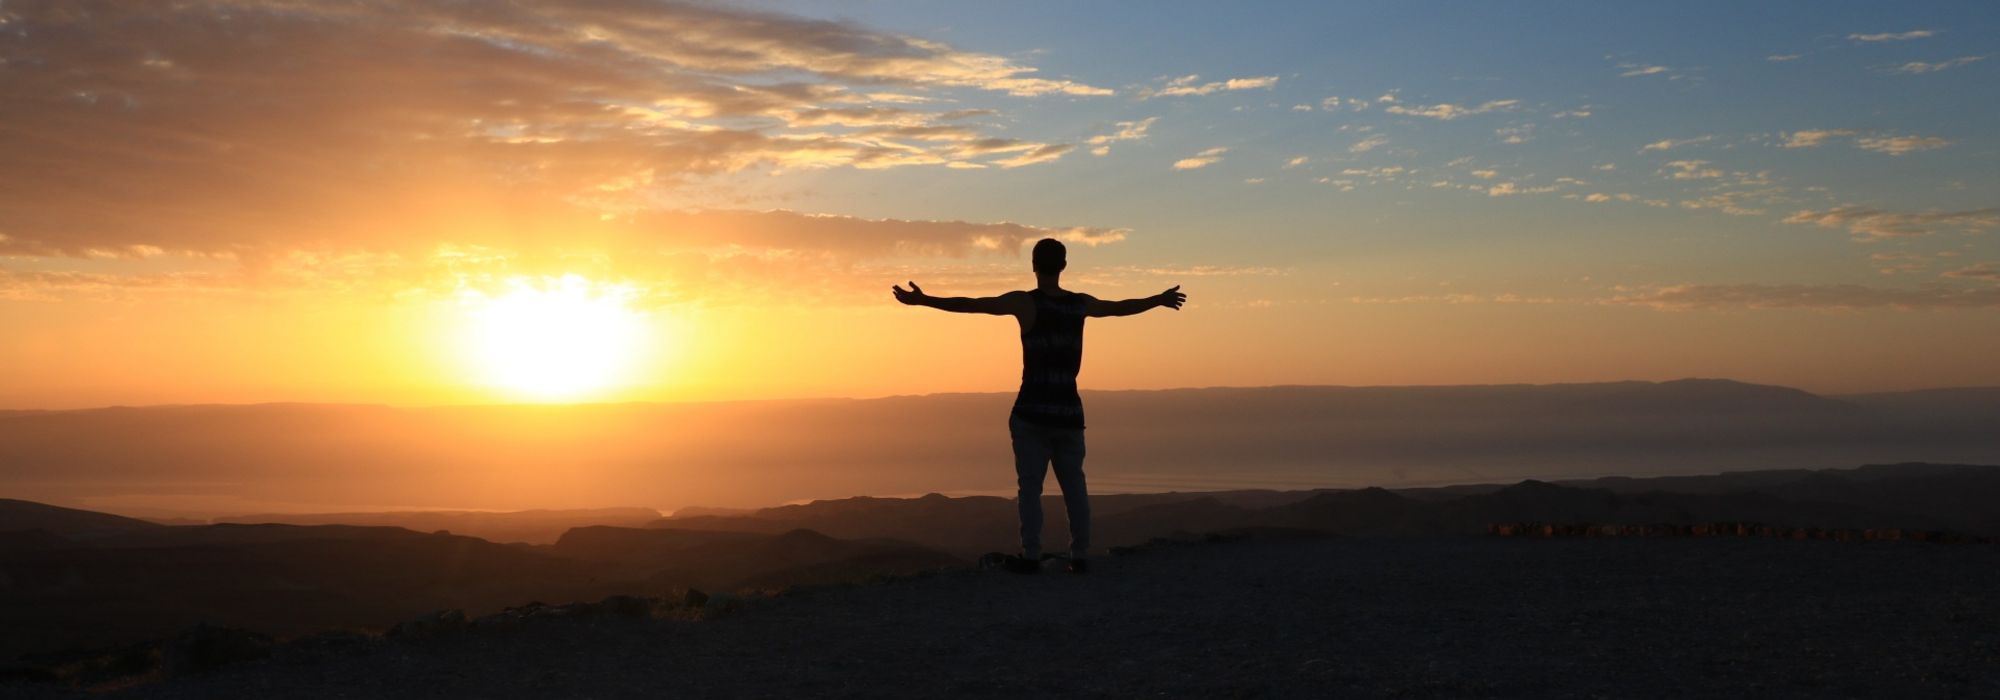 silhouette of man with arms outstretched in front of a sunset